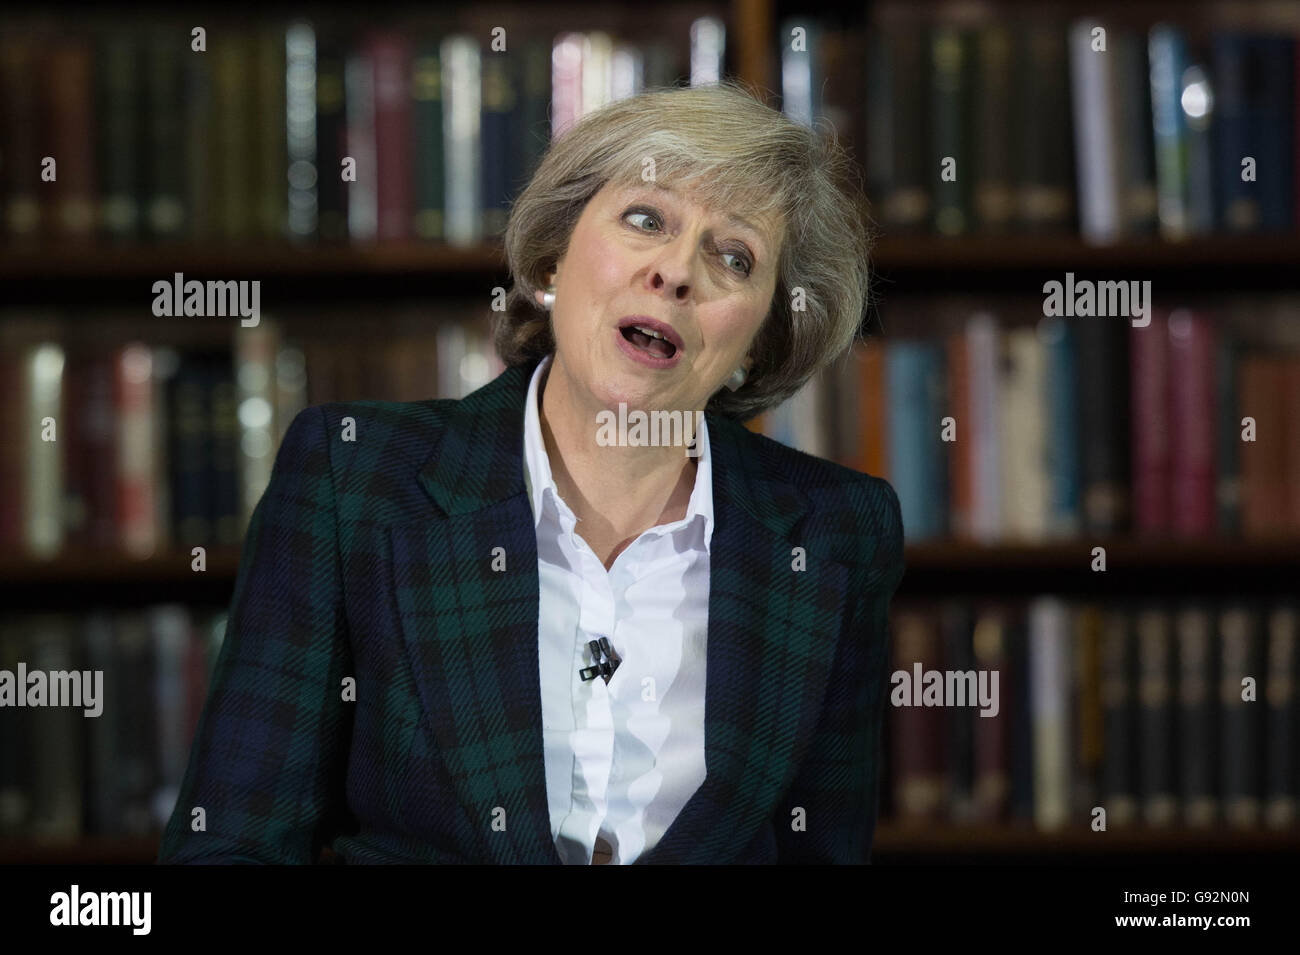 Home Secretary Theresa May launches her Conservative leadership campaign at RUSI in London, as she formally enters the race to succeed David Cameron in Downing Street. Stock Photo